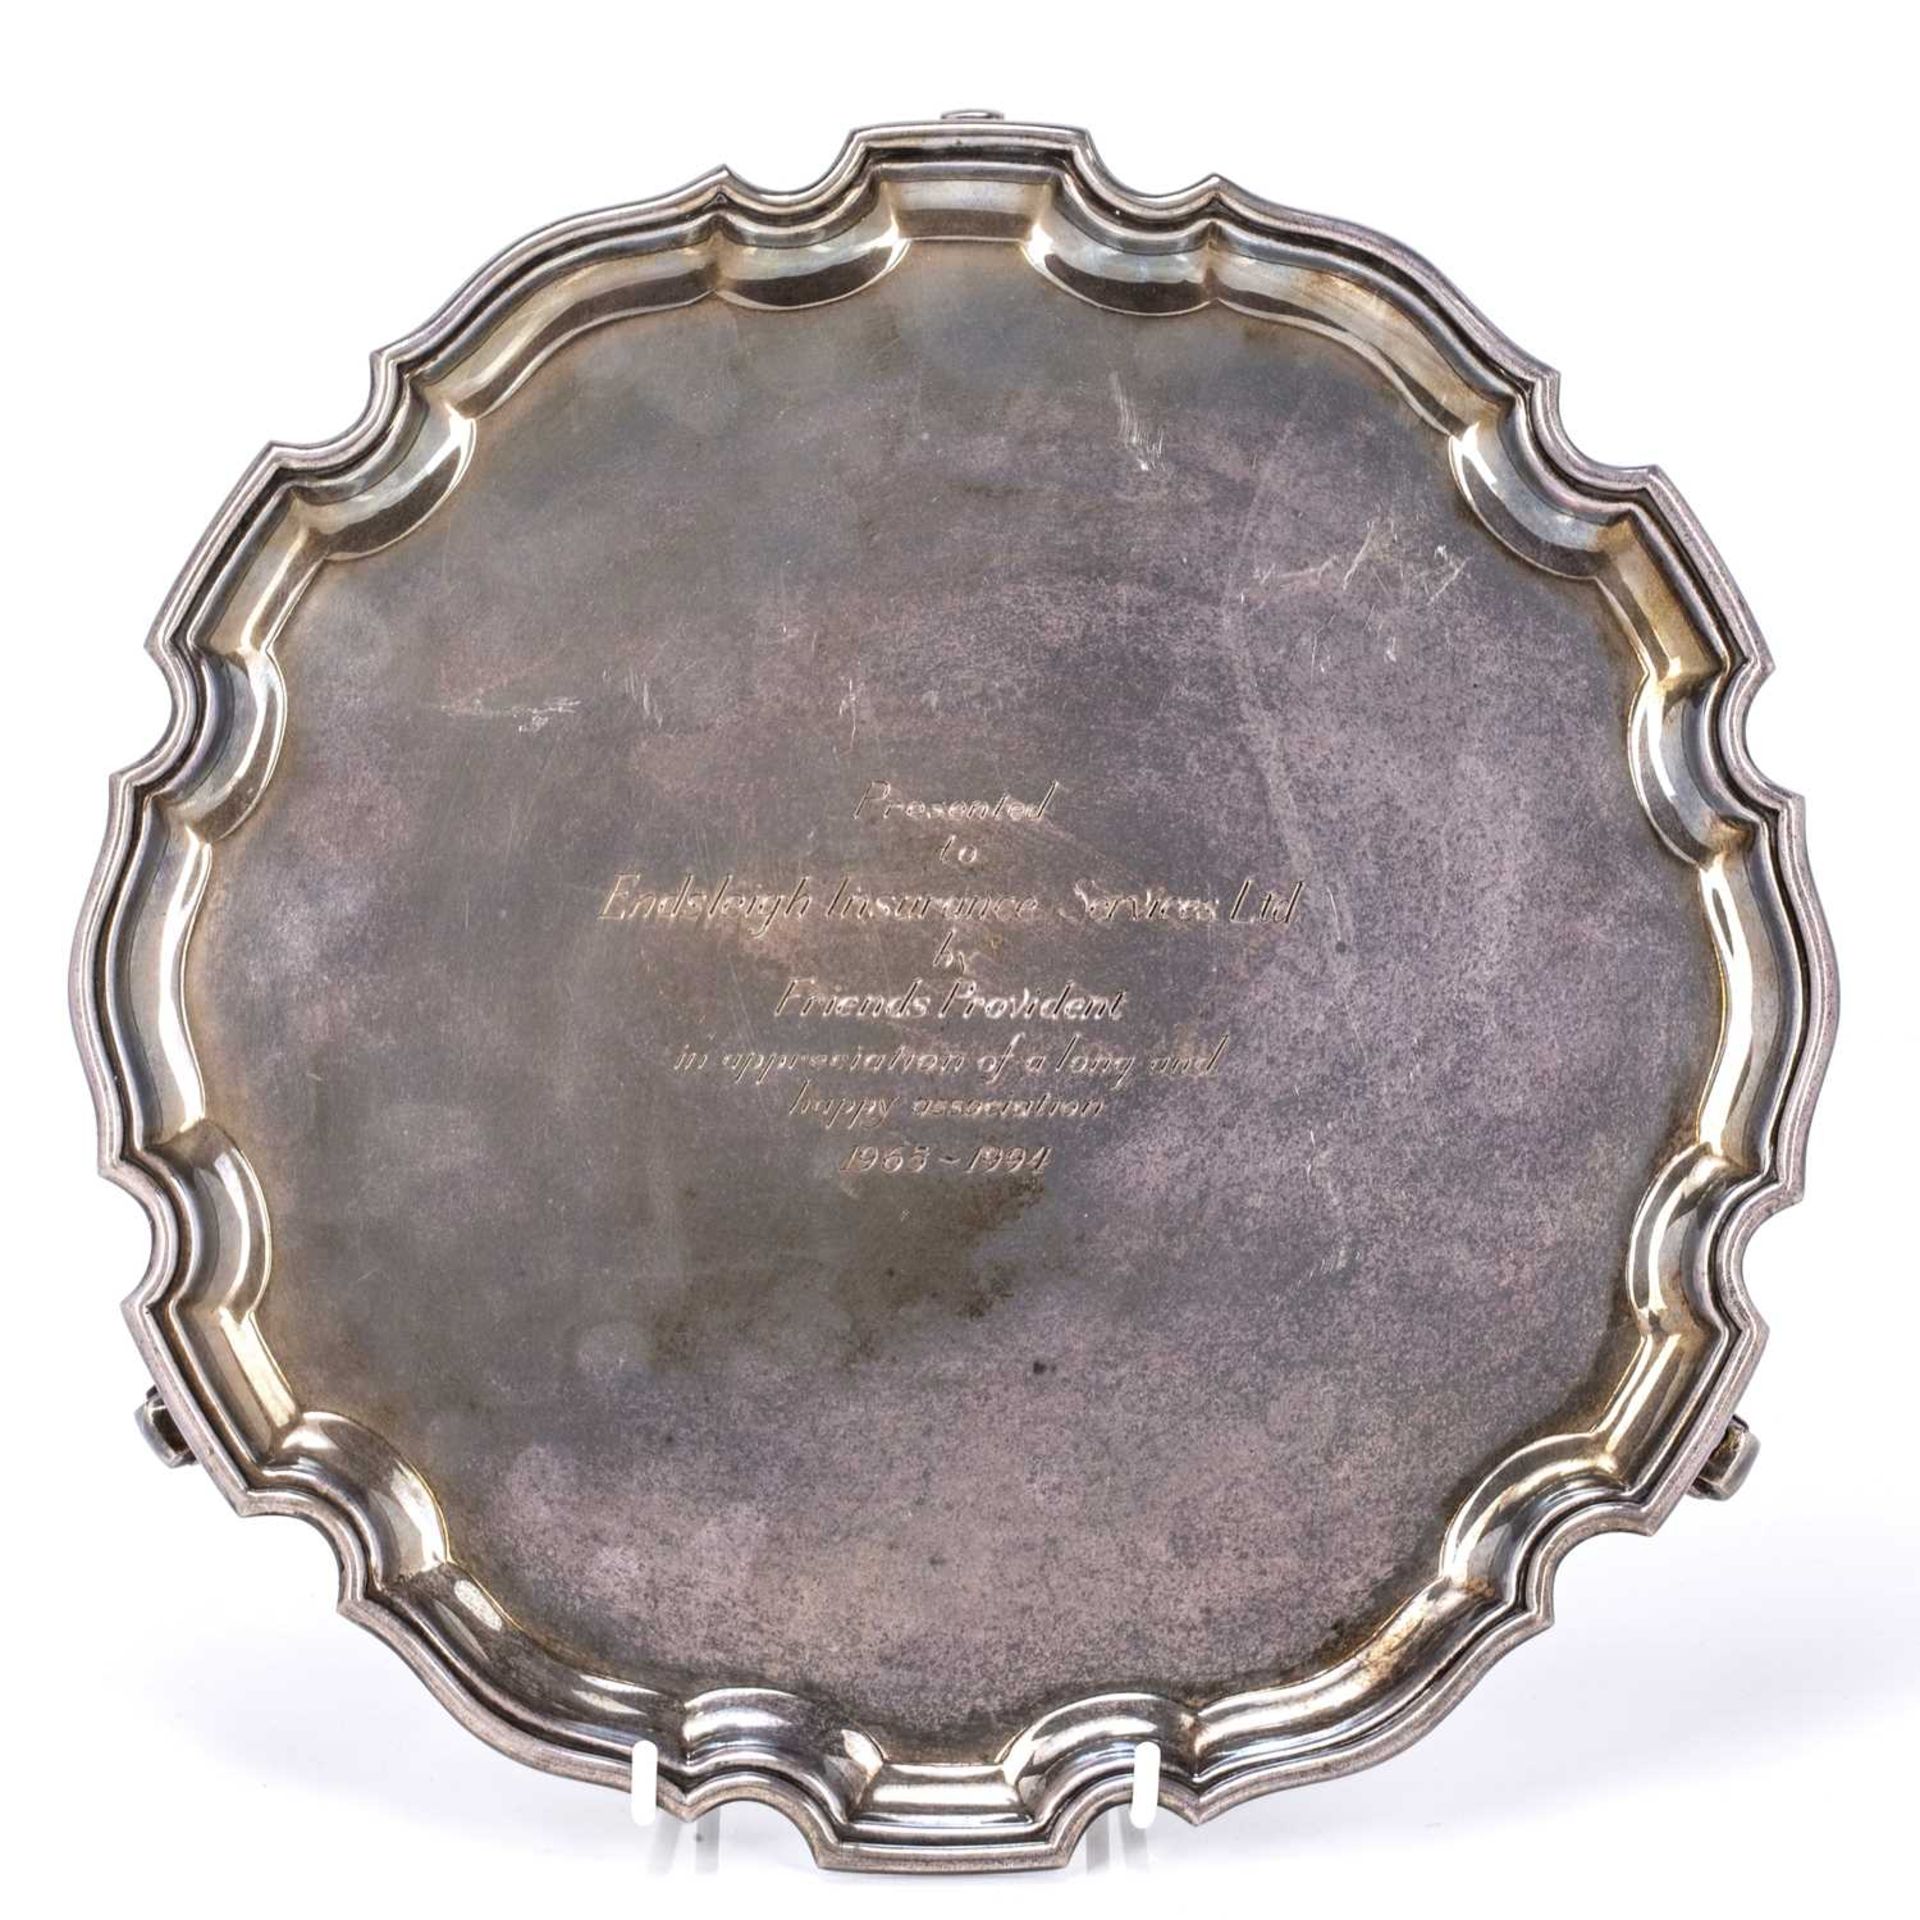 Elizabeth II silver salver standing on three scroll feet, bearing marks for Camelot Silverware